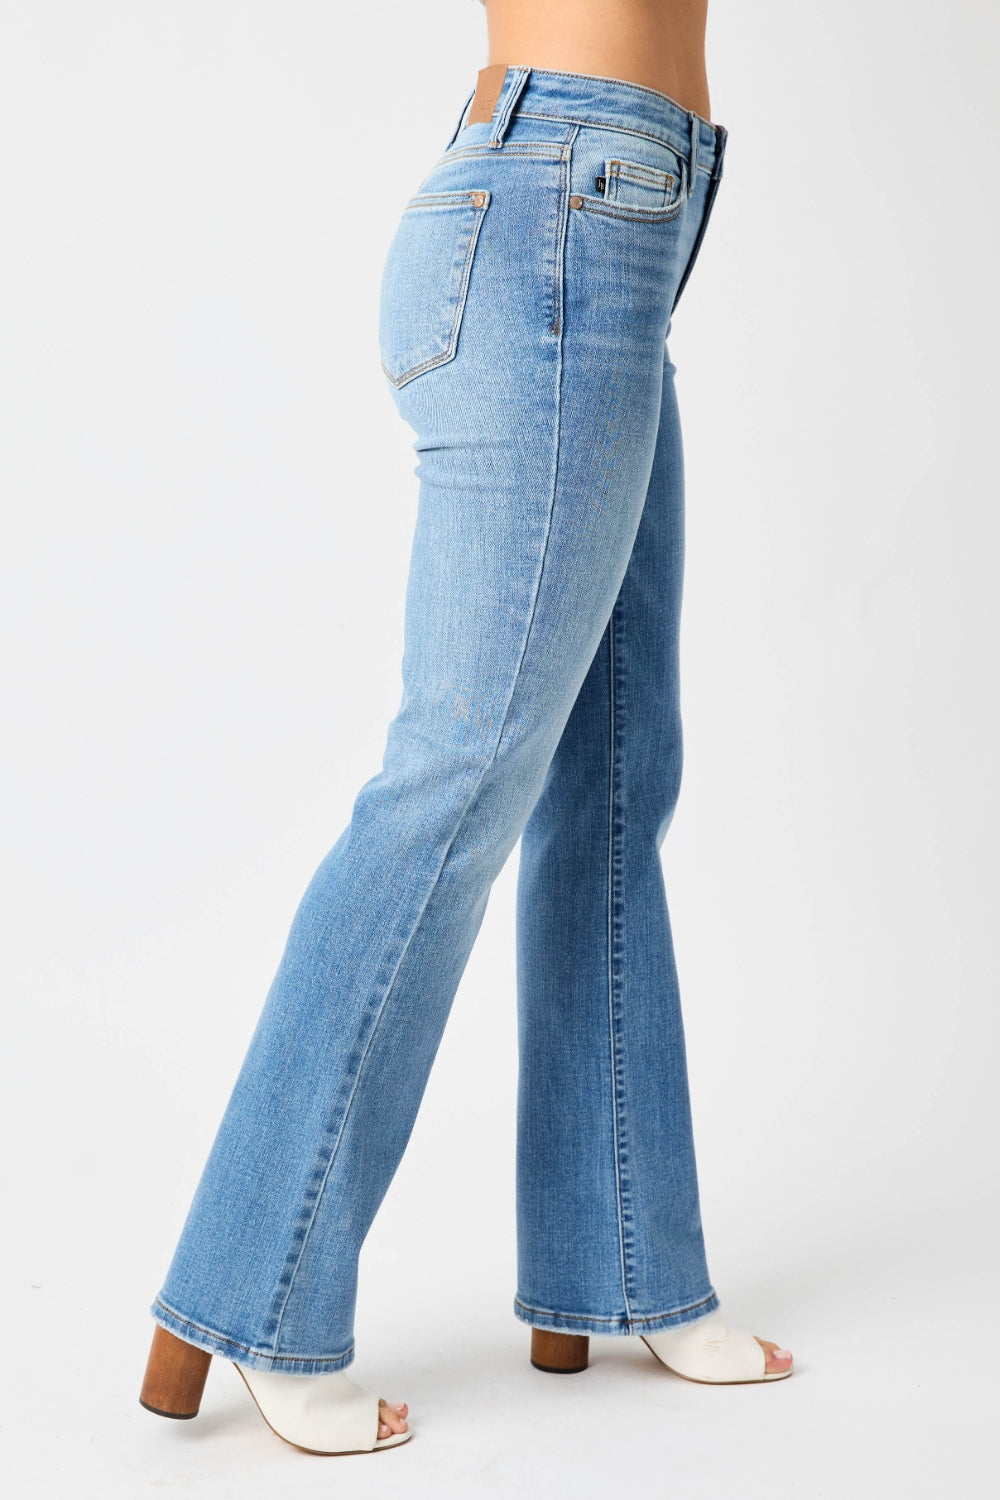 ONLINE ONLY! Judy Blue Full Size High Waist Straight Jeans